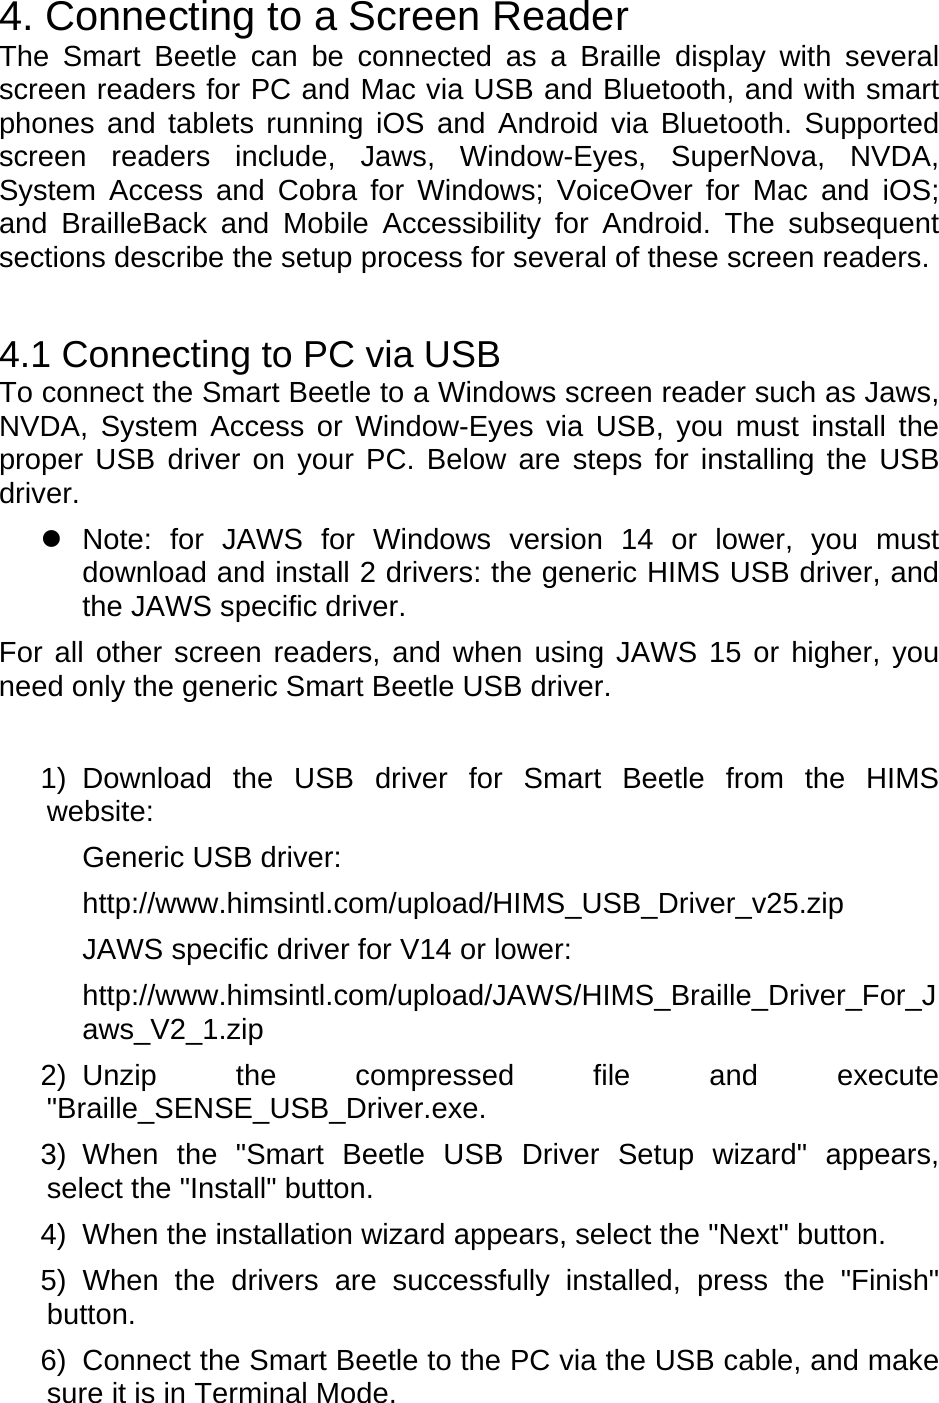 4. Connecting to a Screen Reader The Smart Beetle can be connected as a Braille display with several screen readers for PC and Mac via USB and Bluetooth, and with smart phones and tablets running iOS and Android via Bluetooth. Supported screen readers include, Jaws, Window-Eyes, SuperNova, NVDA, System Access and Cobra for Windows; VoiceOver for Mac and iOS; and BrailleBack and Mobile Accessibility for Android. The subsequent sections describe the setup process for several of these screen readers.  4.1 Connecting to PC via USB To connect the Smart Beetle to a Windows screen reader such as Jaws, NVDA, System Access or Window-Eyes via USB, you must install the proper USB driver on your PC. Below are steps for installing the USB driver.   Note: for JAWS for Windows version 14 or lower, you must download and install 2 drivers: the generic HIMS USB driver, and the JAWS specific driver. For all other screen readers, and when using JAWS 15 or higher, you need only the generic Smart Beetle USB driver.   1) Download the USB driver for Smart Beetle from the HIMS website:   Generic USB driver:   http://www.himsintl.com/upload/HIMS_USB_Driver_v25.zip JAWS specific driver for V14 or lower:     http://www.himsintl.com/upload/JAWS/HIMS_Braille_Driver_For_Jaws_V2_1.zip 2) Unzip the compressed file and execute &quot;Braille_SENSE_USB_Driver.exe. 3) When the &quot;Smart Beetle USB Driver Setup wizard&quot; appears, select the &quot;Install&quot; button.   4)  When the installation wizard appears, select the &quot;Next&quot; button.   5) When the drivers are successfully installed, press the &quot;Finish&quot; button.  6)  Connect the Smart Beetle to the PC via the USB cable, and make sure it is in Terminal Mode.   